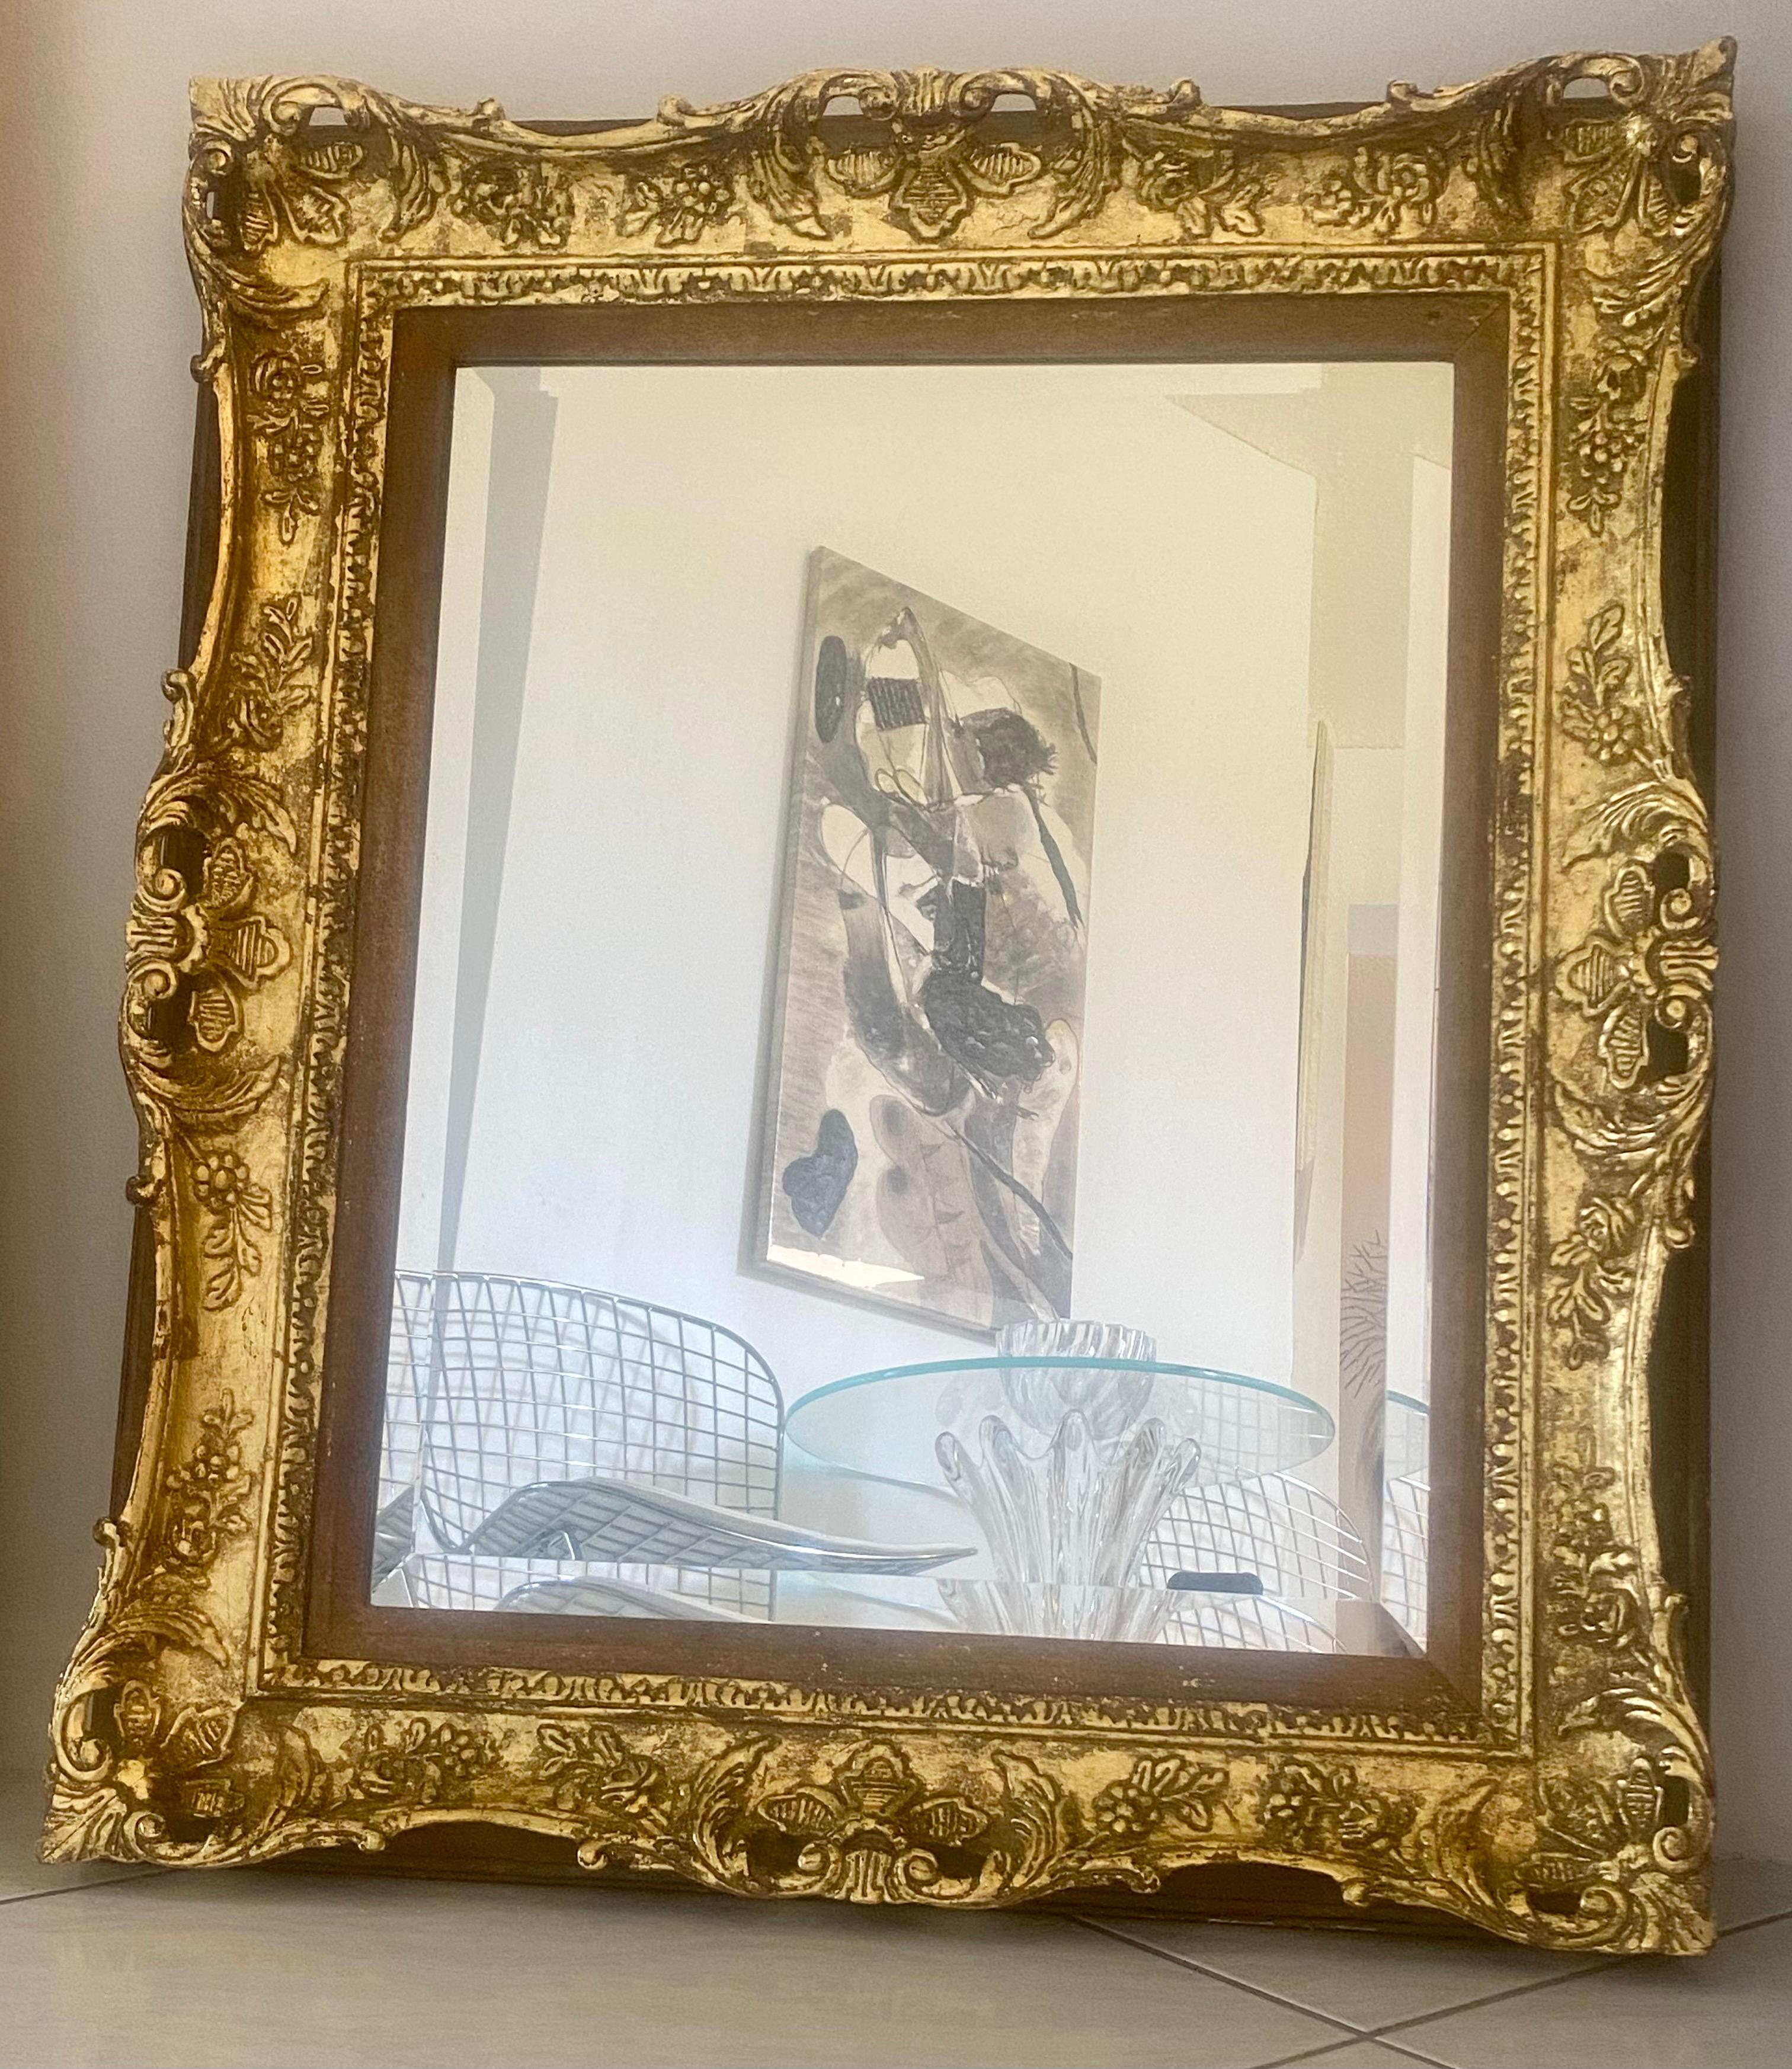 An ornately carved French antique frame with gold leaf and beveled mirror.